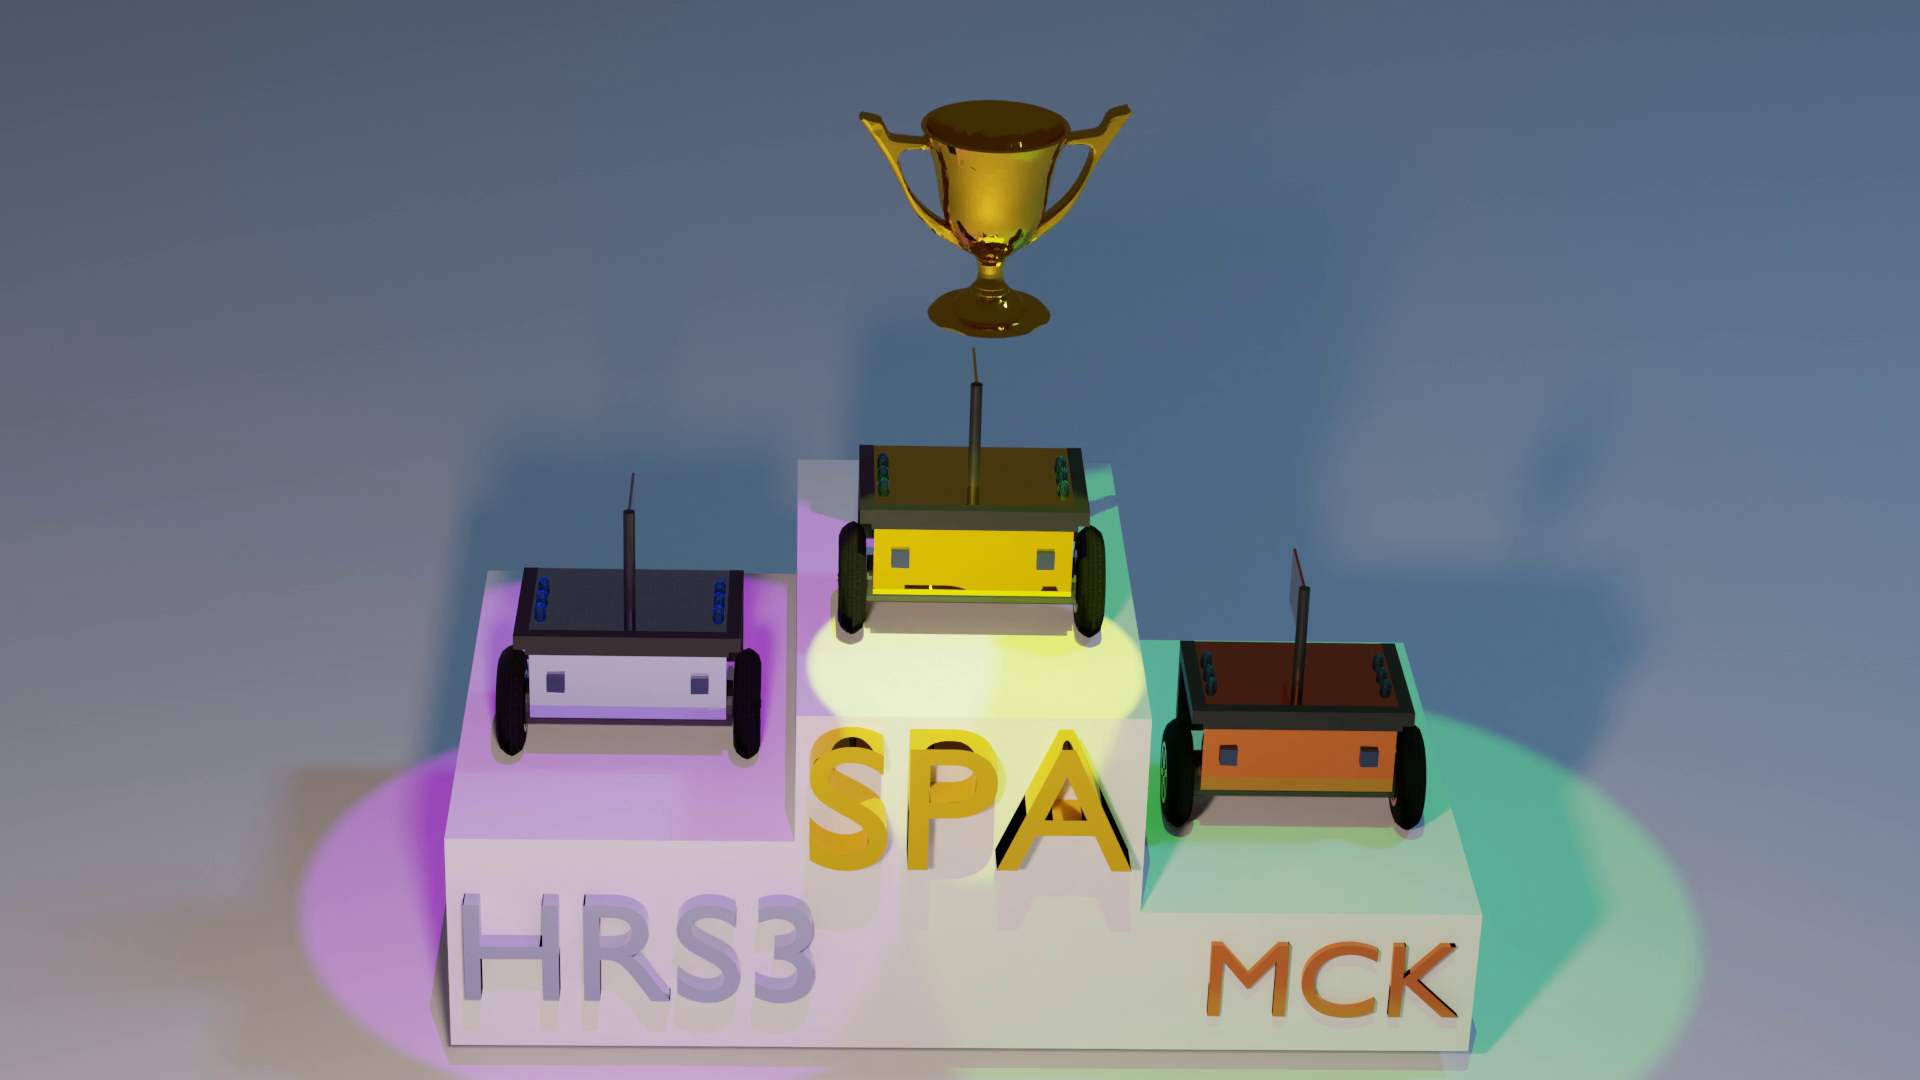 A podium, with rendered trophies, featuring SPA in Gold, HRS2 in Silver, and MCK in Bronze